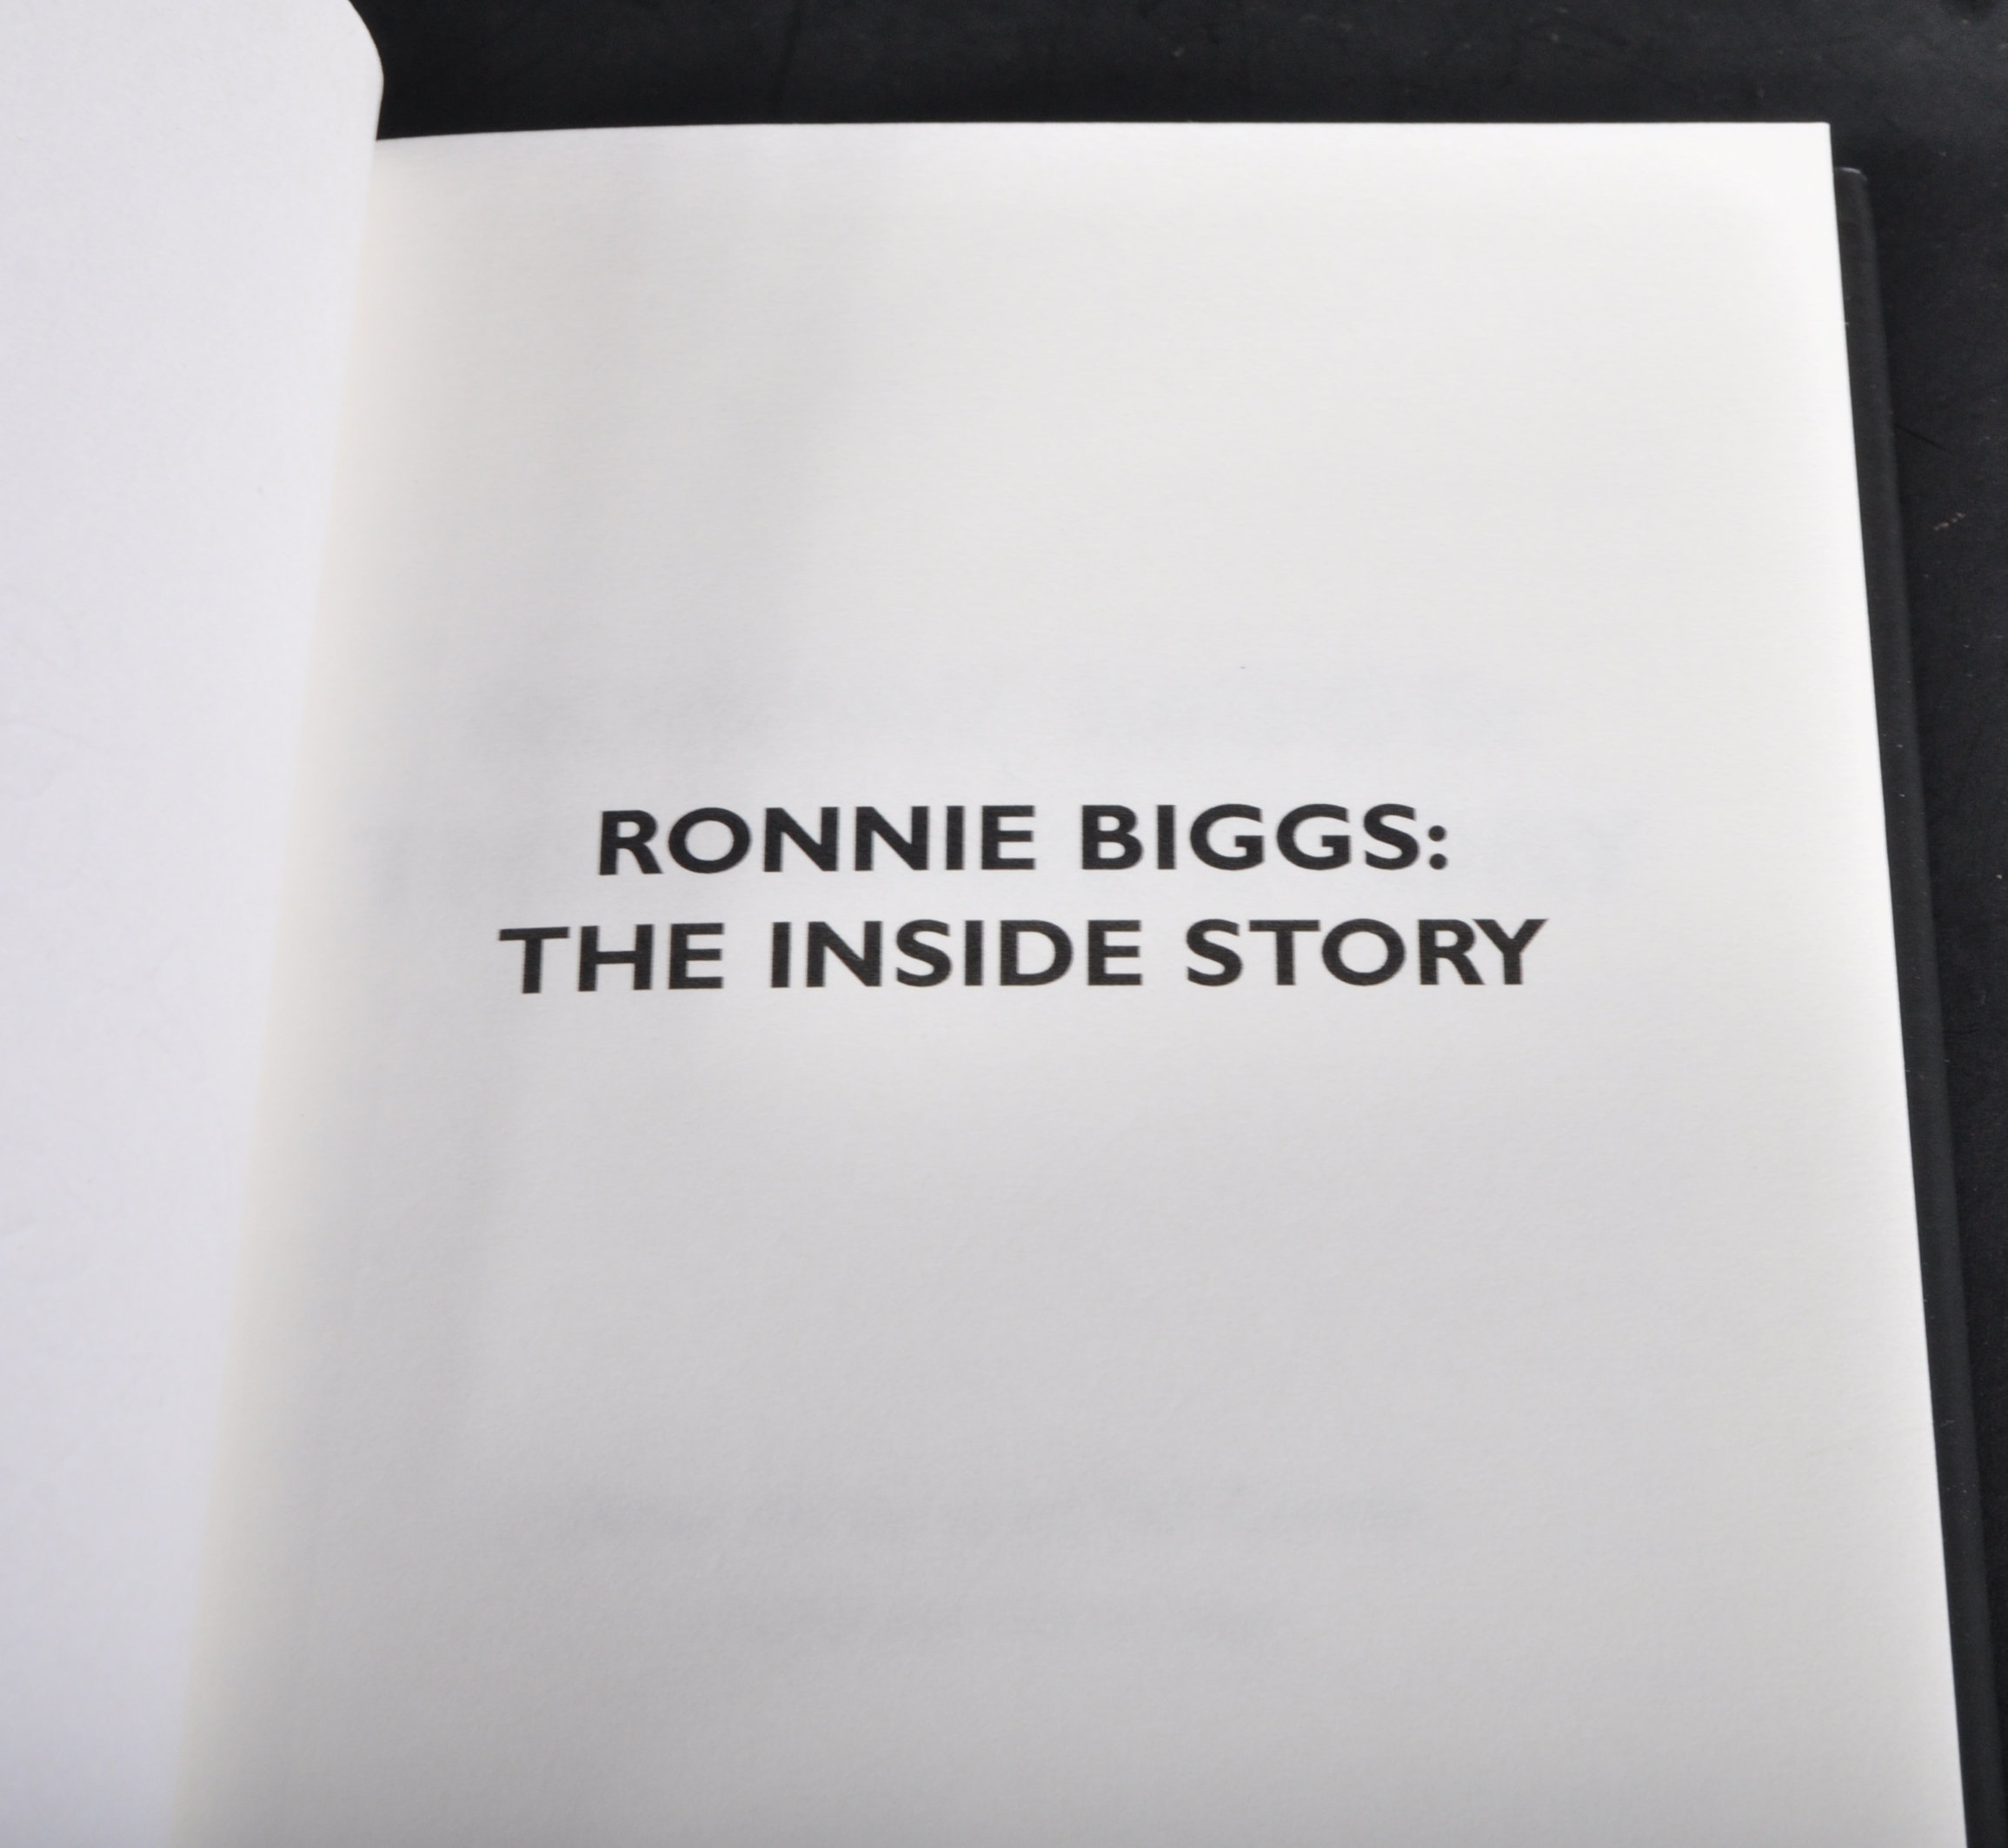 GREAT TRAIN ROBBERY - RONNIE BIGGS THE INSIDE STORY SIGNED - Image 4 of 7